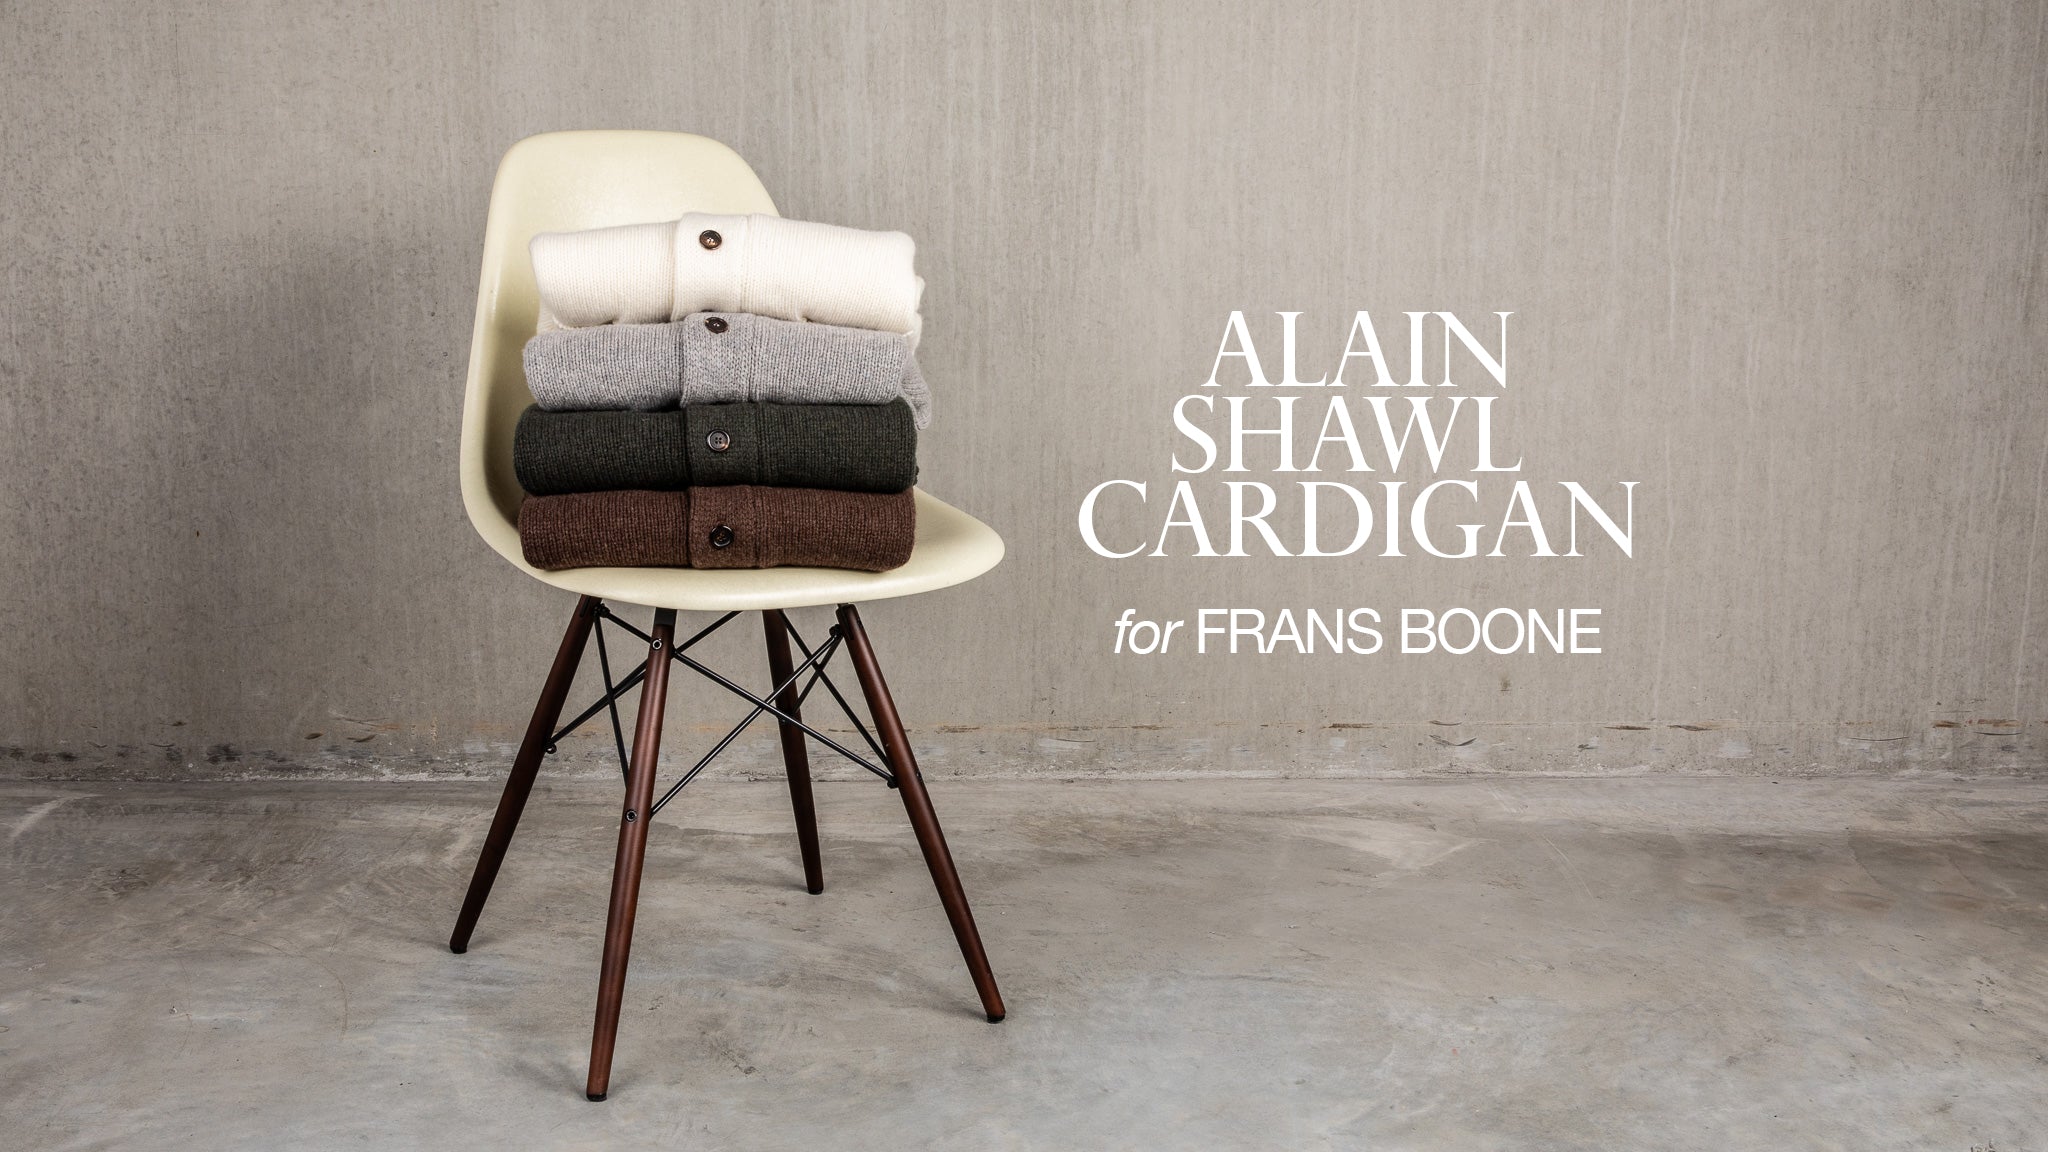 The Alain Shawl Cardigan for Frans Boone